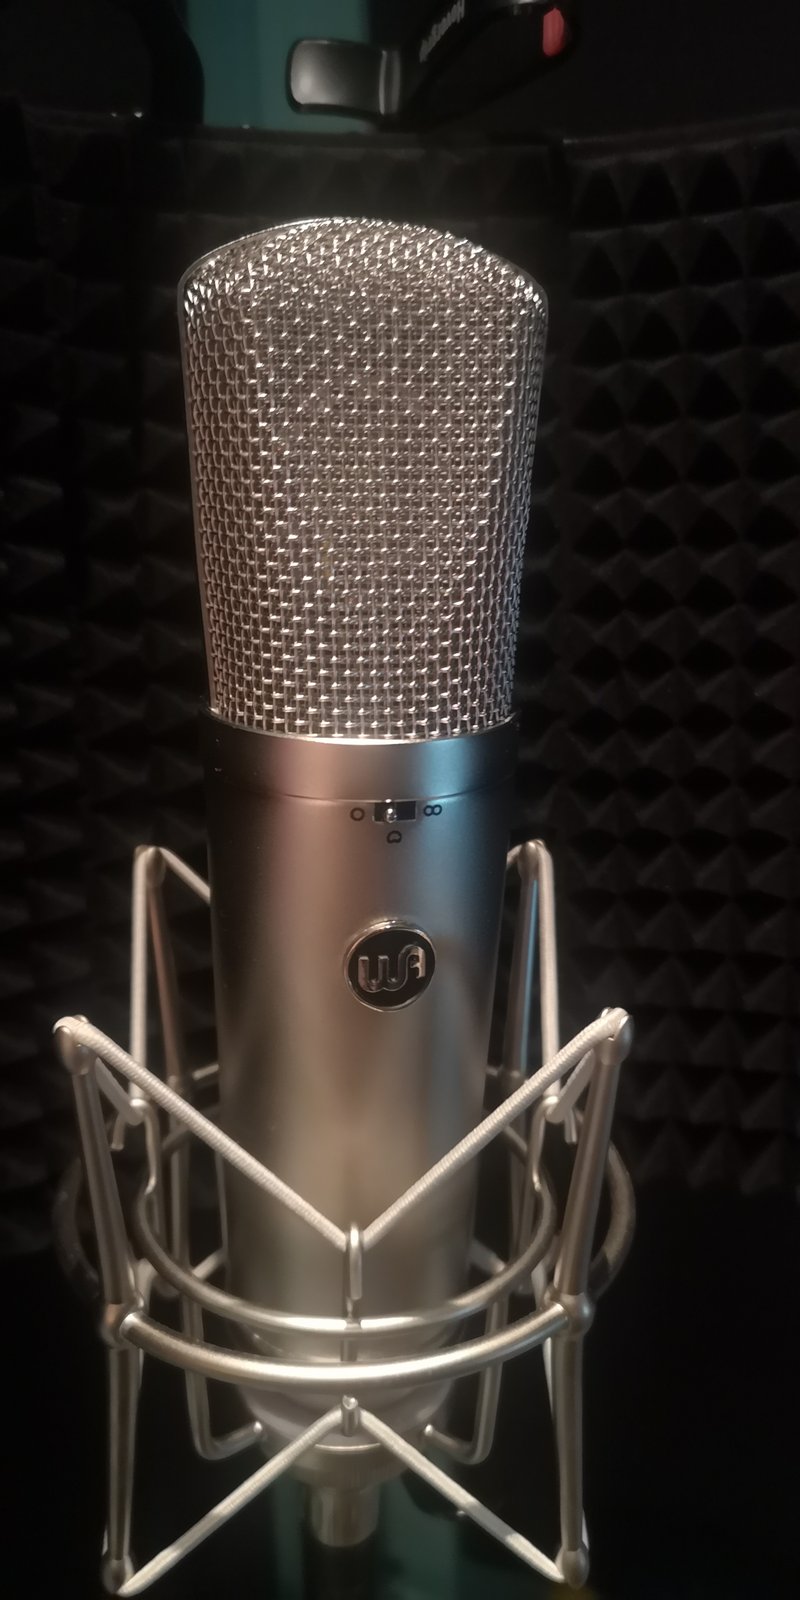 A Natural, Engaging Voice Over for Your Elearning Video